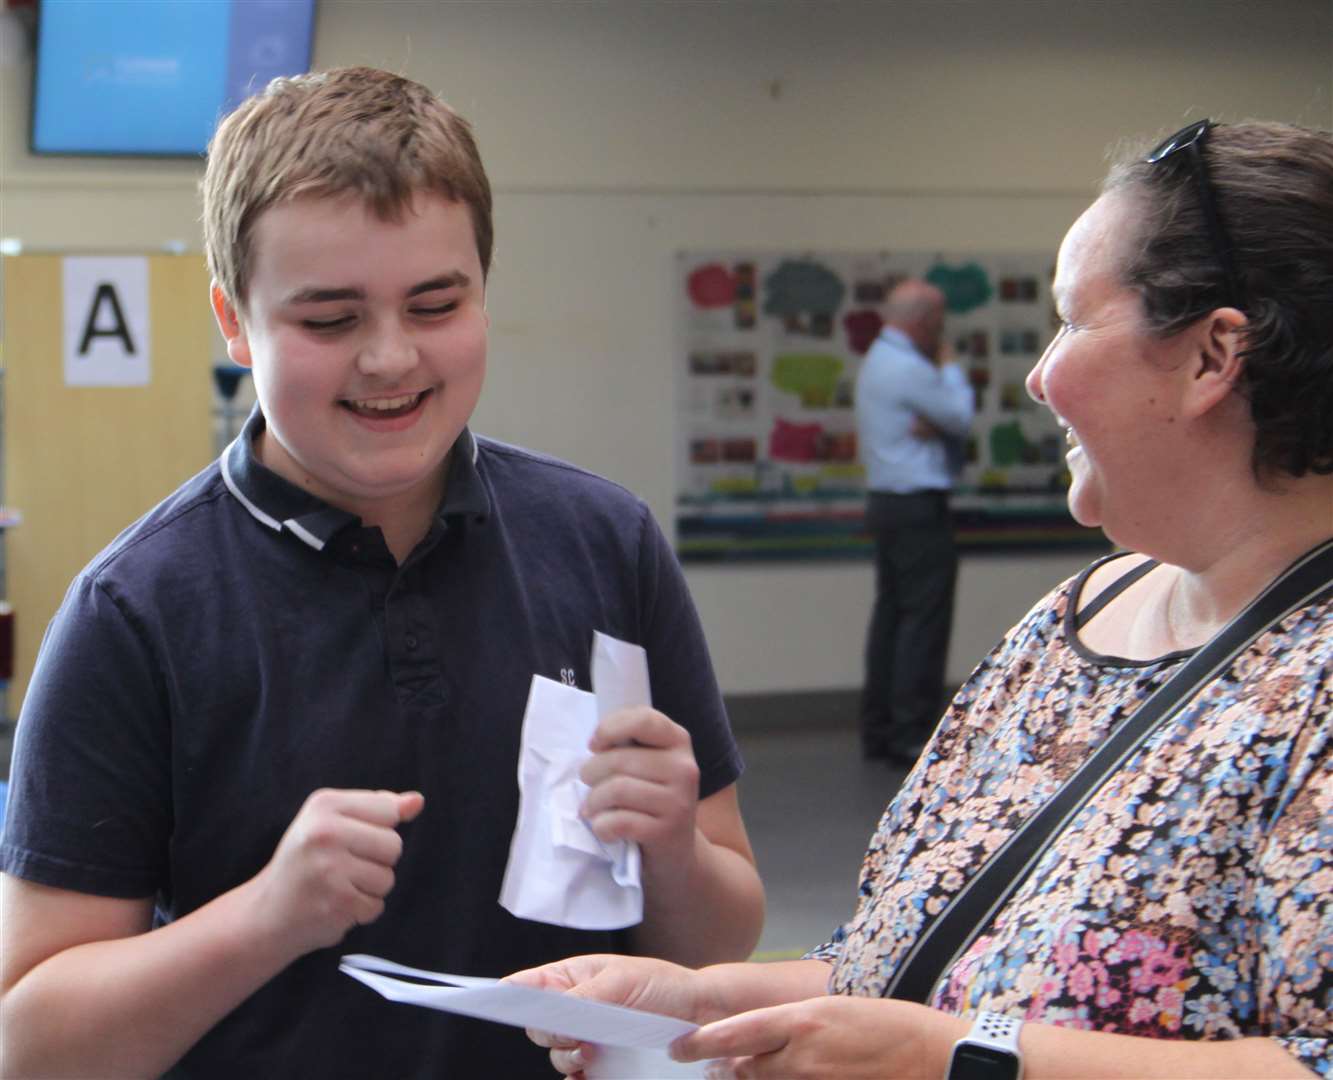 Students have been receiving their results today